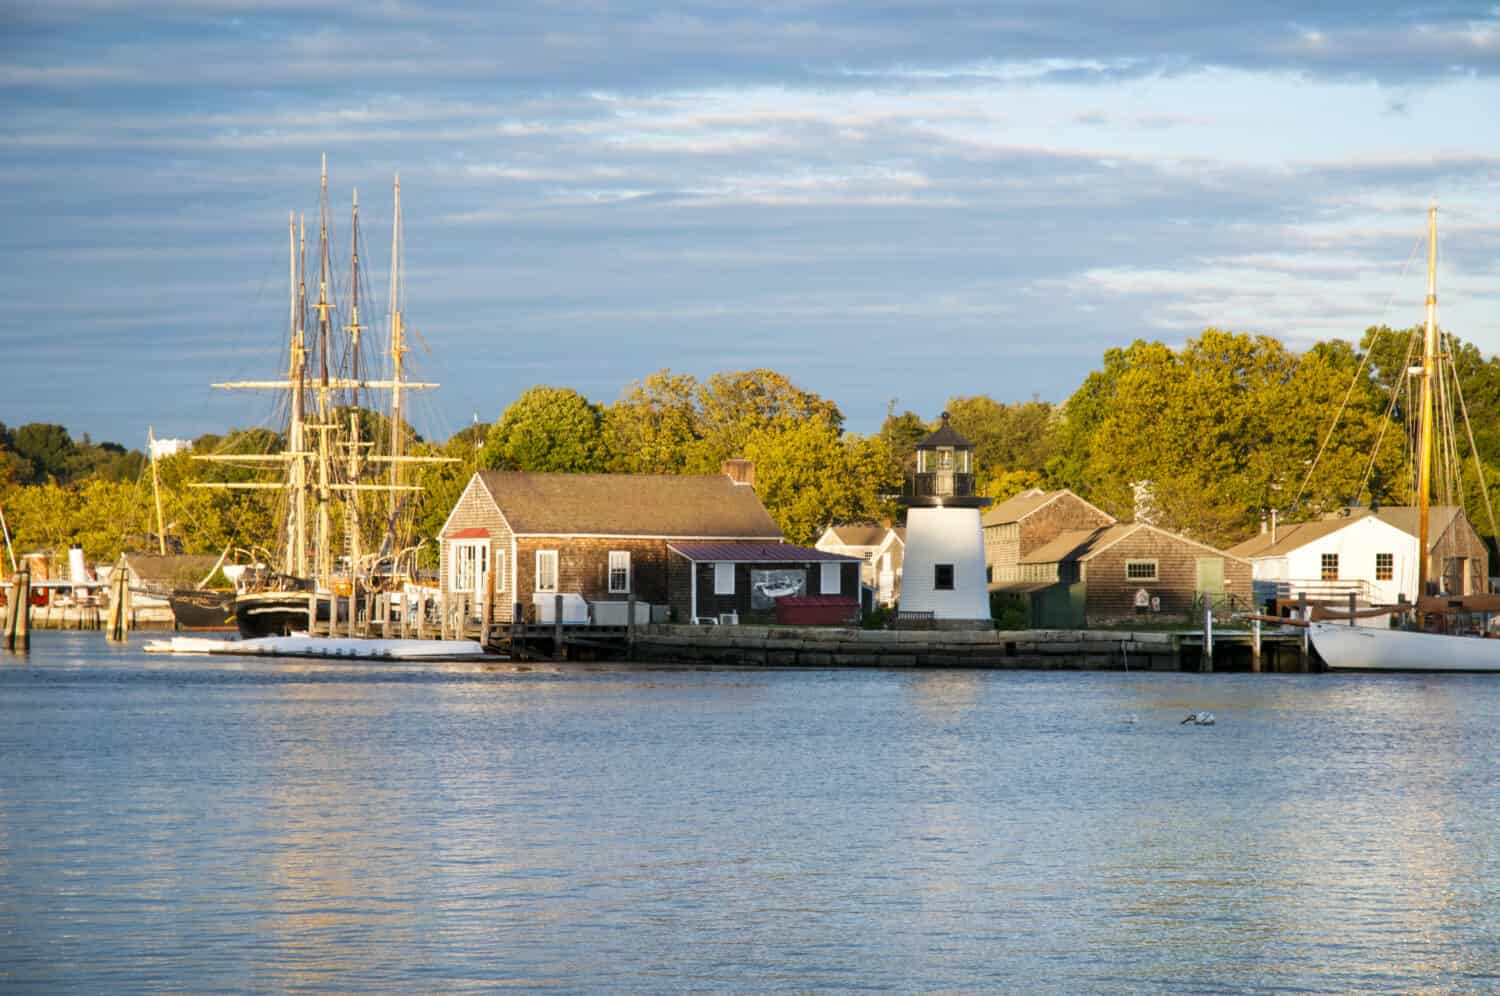 Sun setting in front of Mystic Seaport, an outdoor recreated 19th century seaport in Connecticut. Visitors will find a whaling ship, and replica of Brant Point light from Nantucket Island.